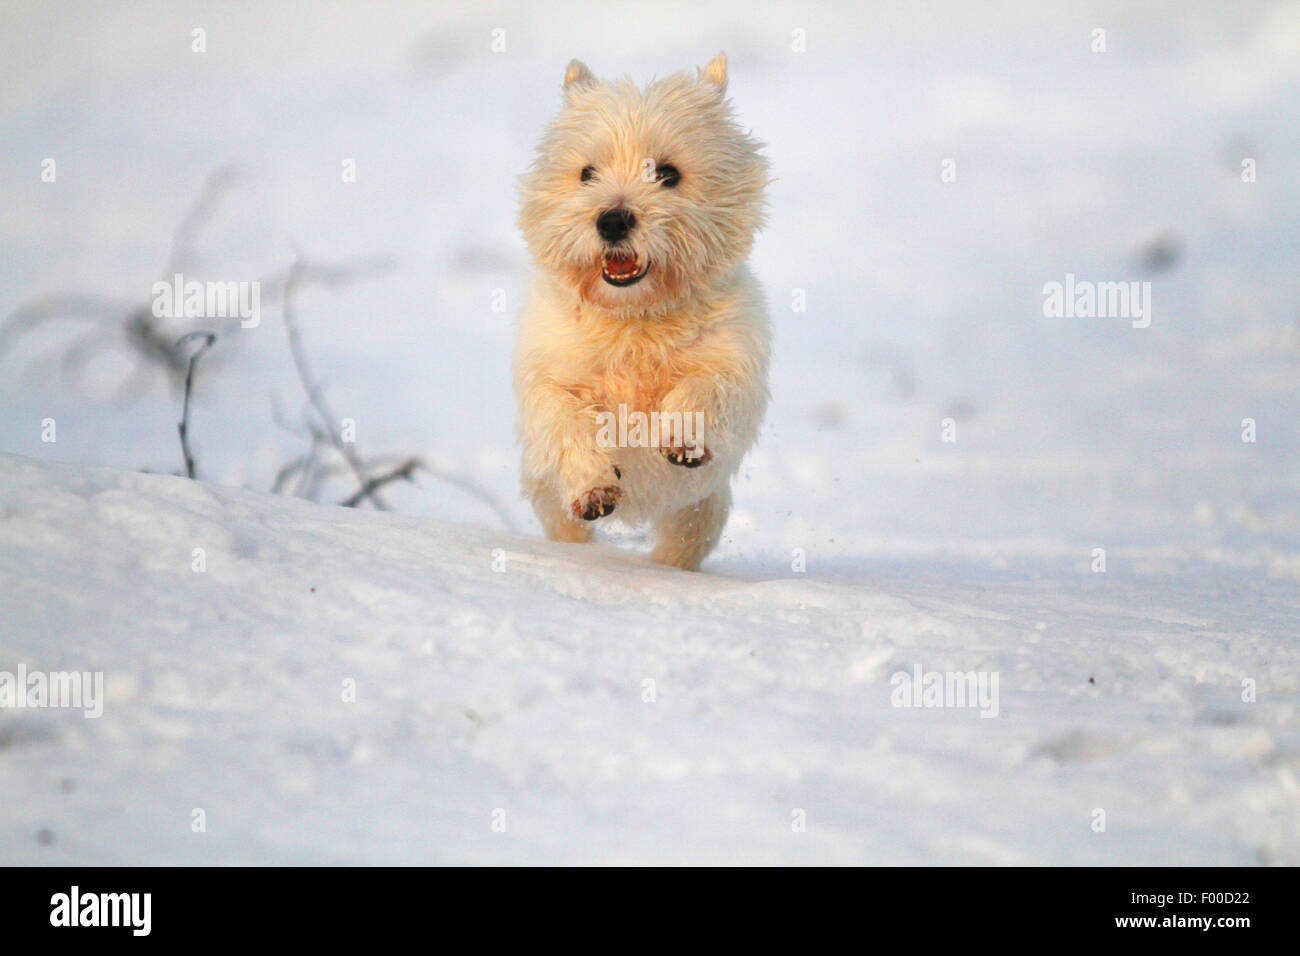 West Highland White Terrier, Westie (Canis lupus f. familiaris), frolicing in un buon umore nella neve, Germania Foto Stock